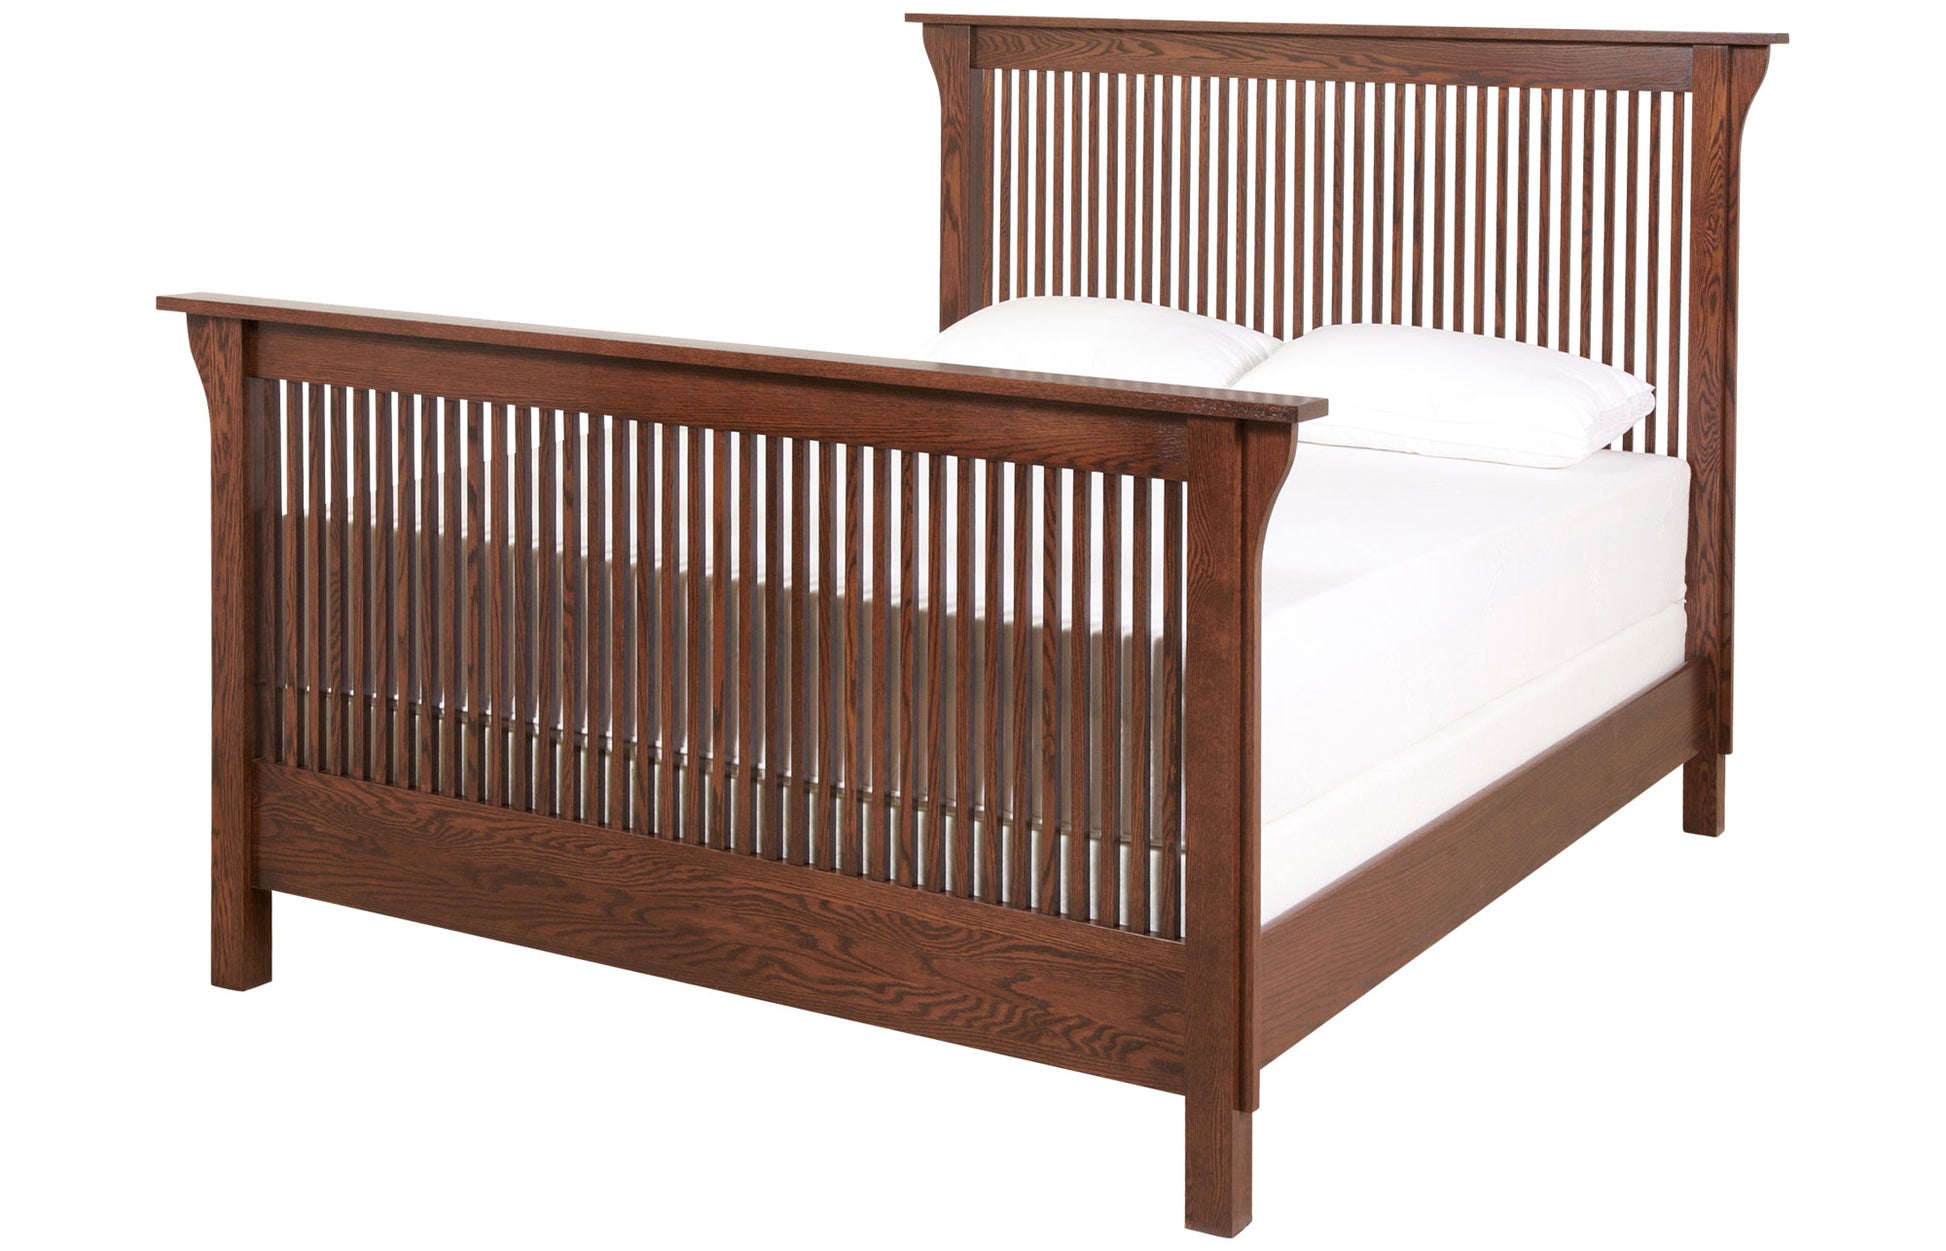 Heirloom Mission bed by Woodworks - solid wood, locally built, Canadian made